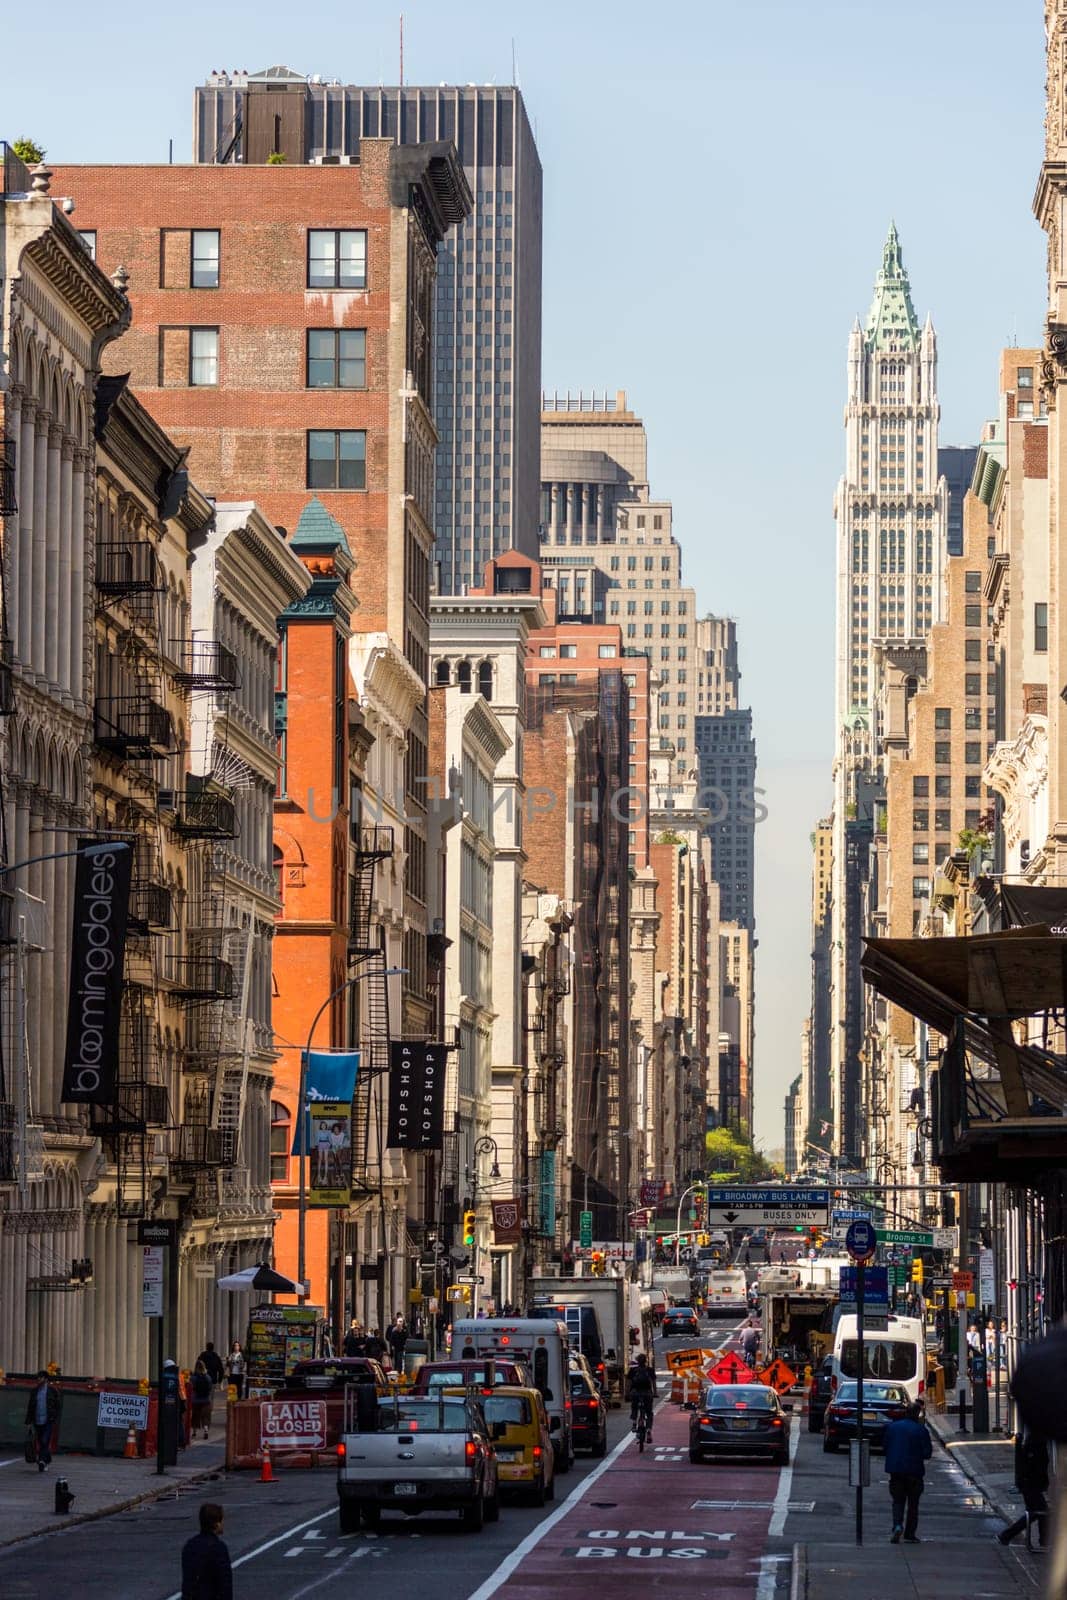 New york, USA - May 15, 2019: Busy street and crowd of people in New York city, USA